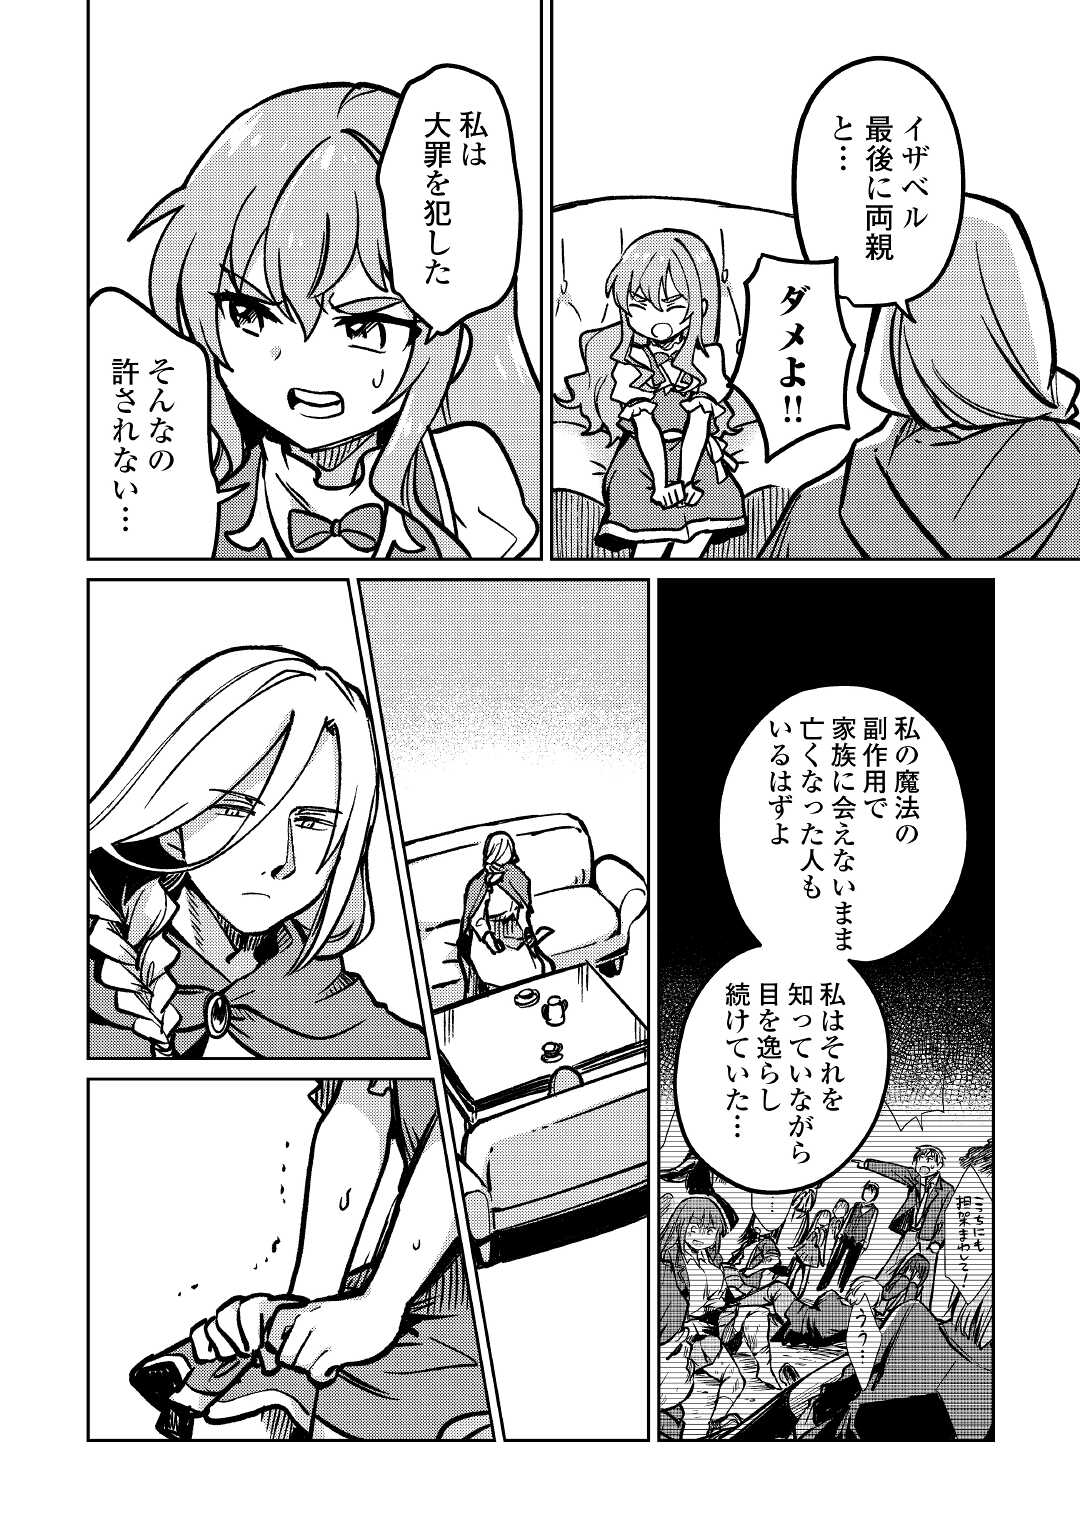 The Former Structural Researcher’s Story of Otherworldly Adventure 第38話 - Page 6